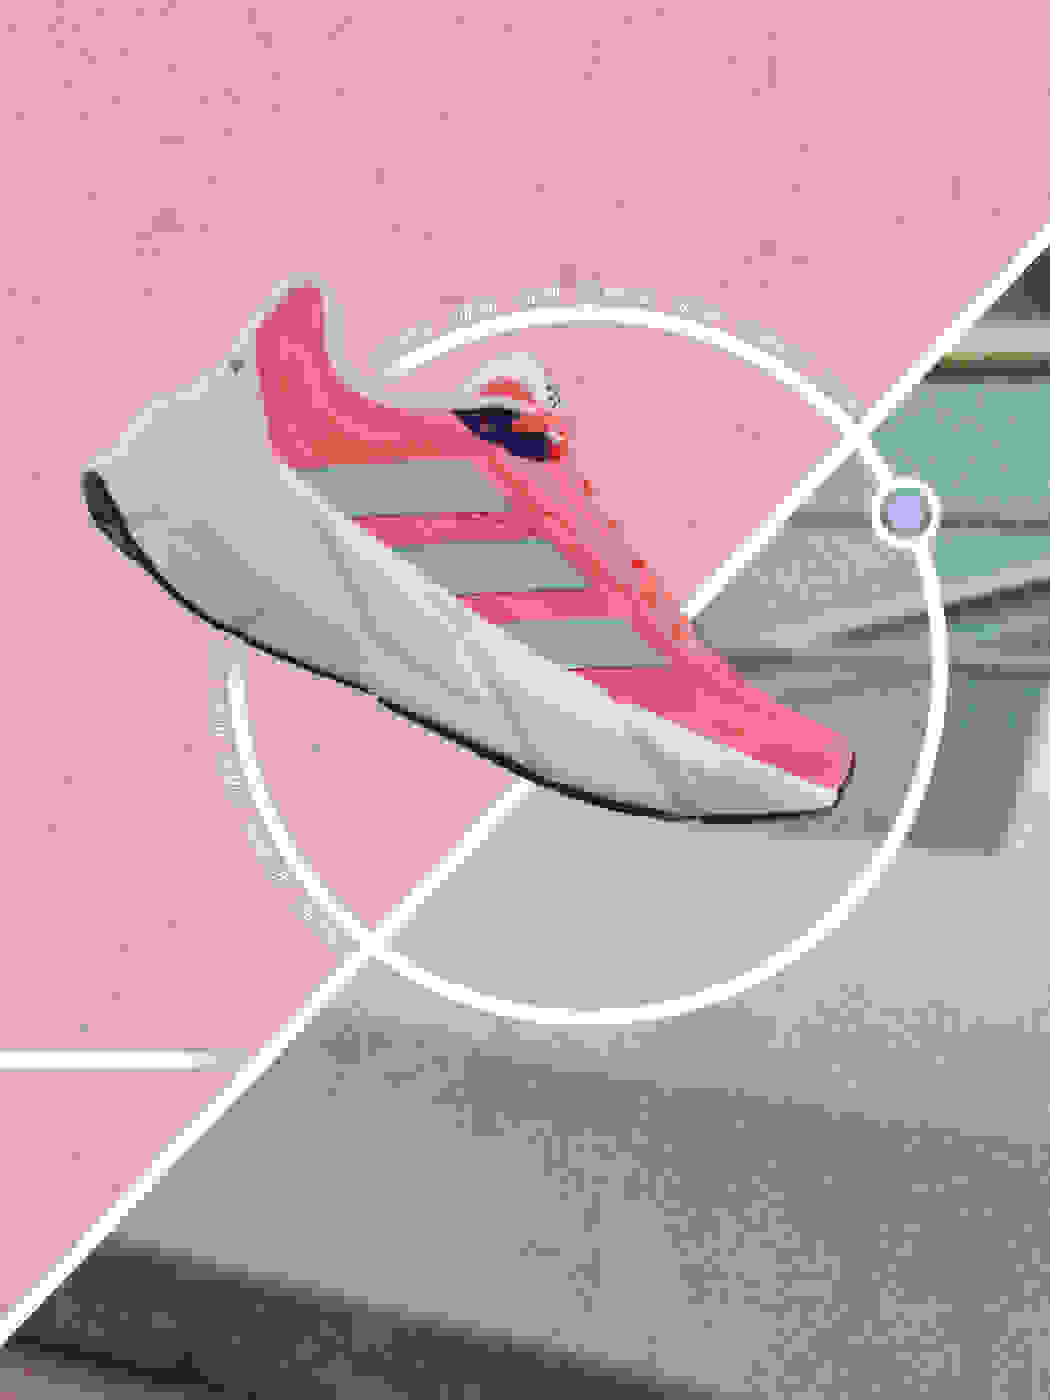 Adistar adidas running shoe superimposed over a split-screen of a pink background and alternating landscapes.